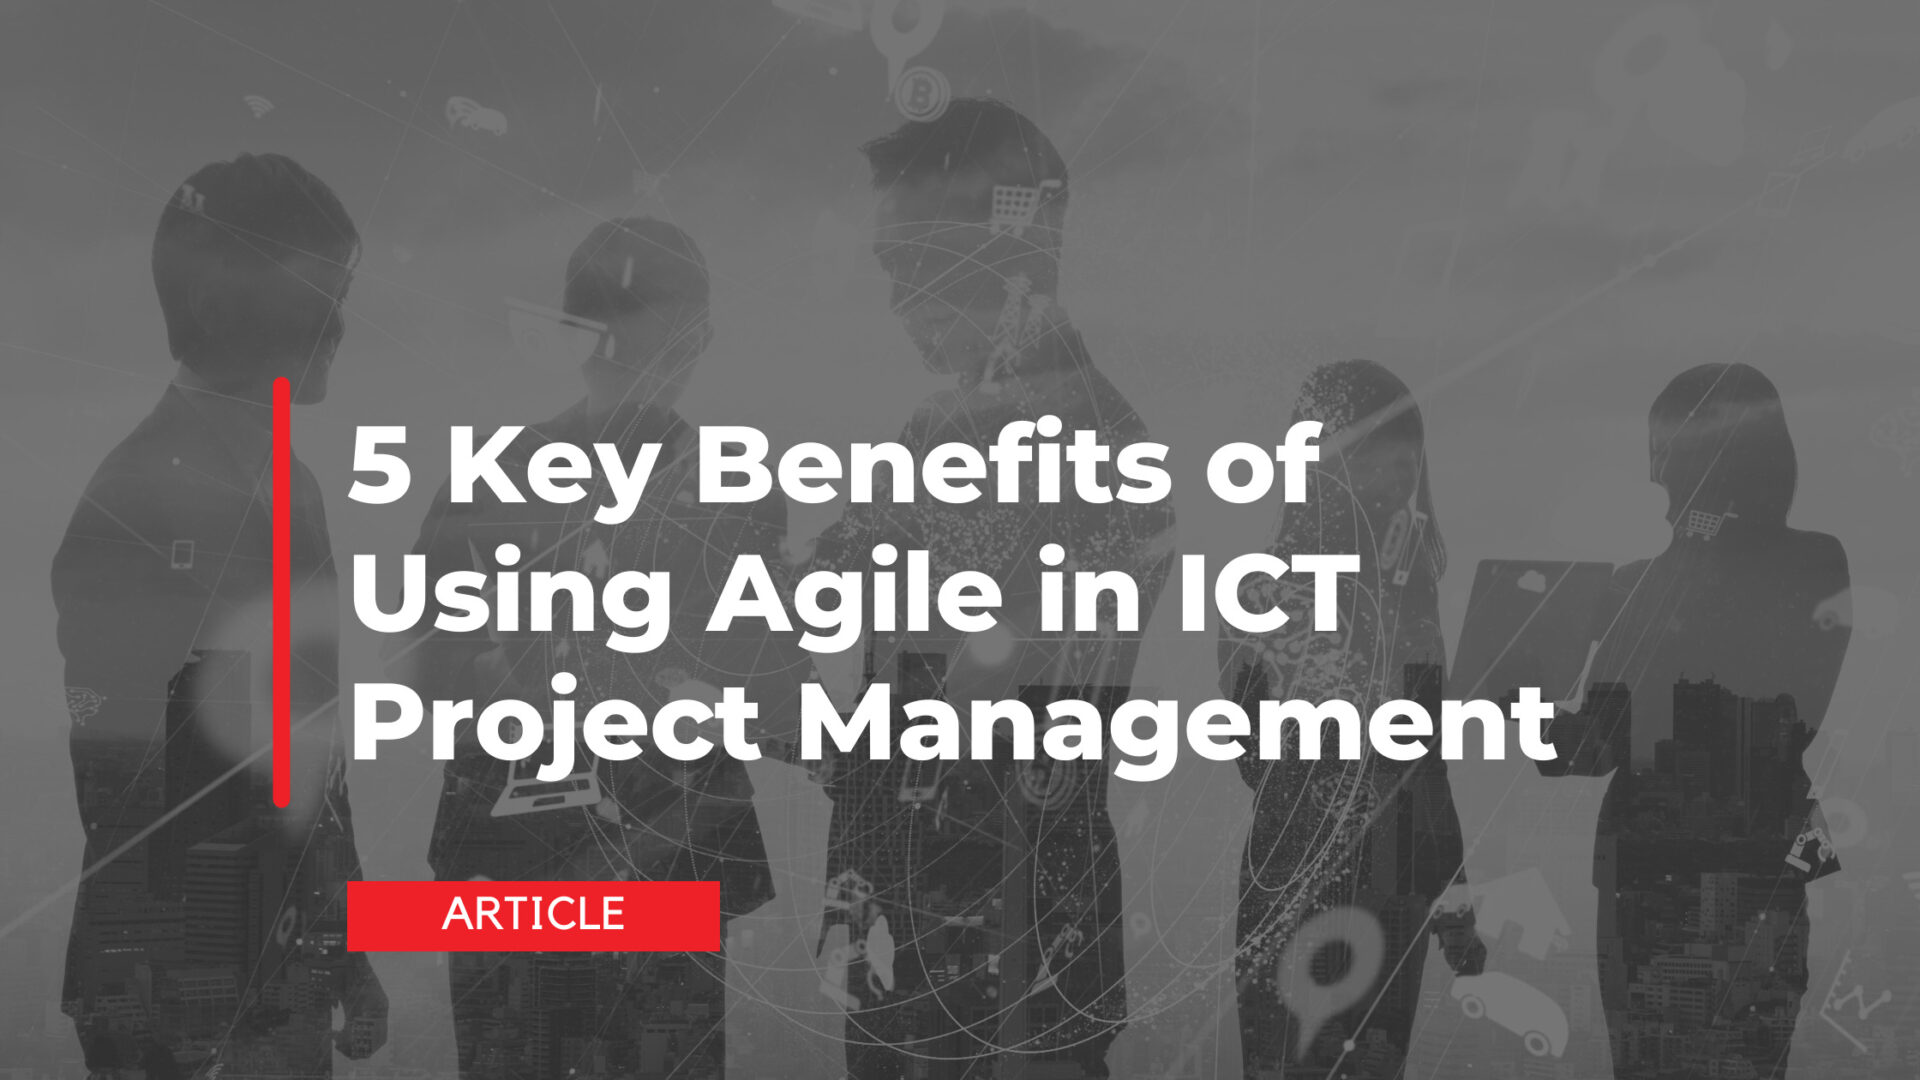 5 Key Benefits of Using Agile in ICT Project Management